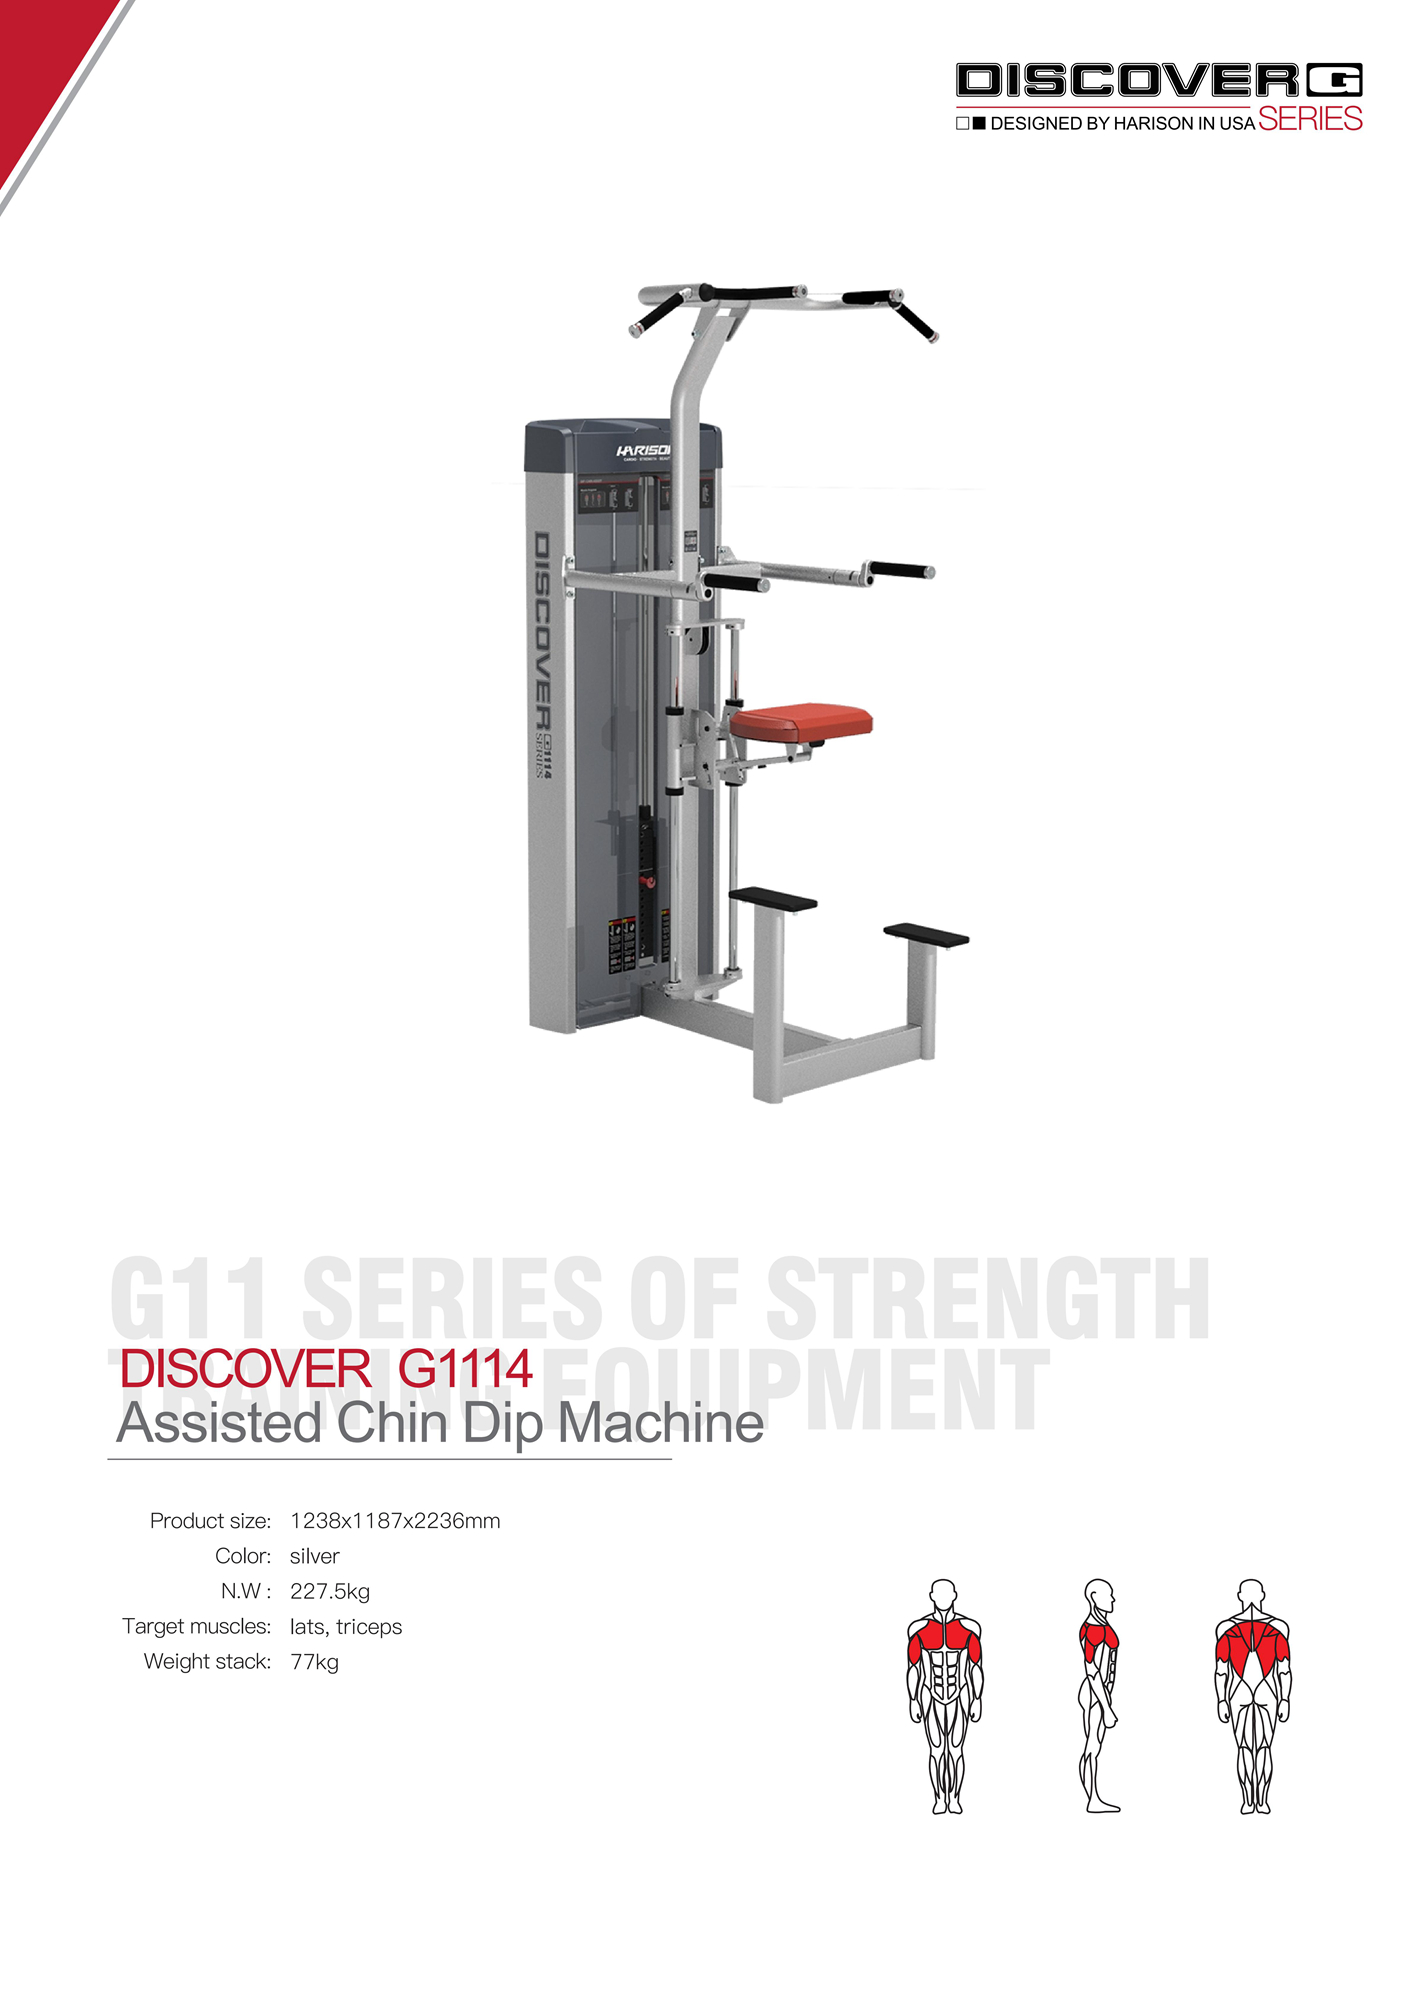 DISCOVER G1114 Assisted Chin Dip Machine